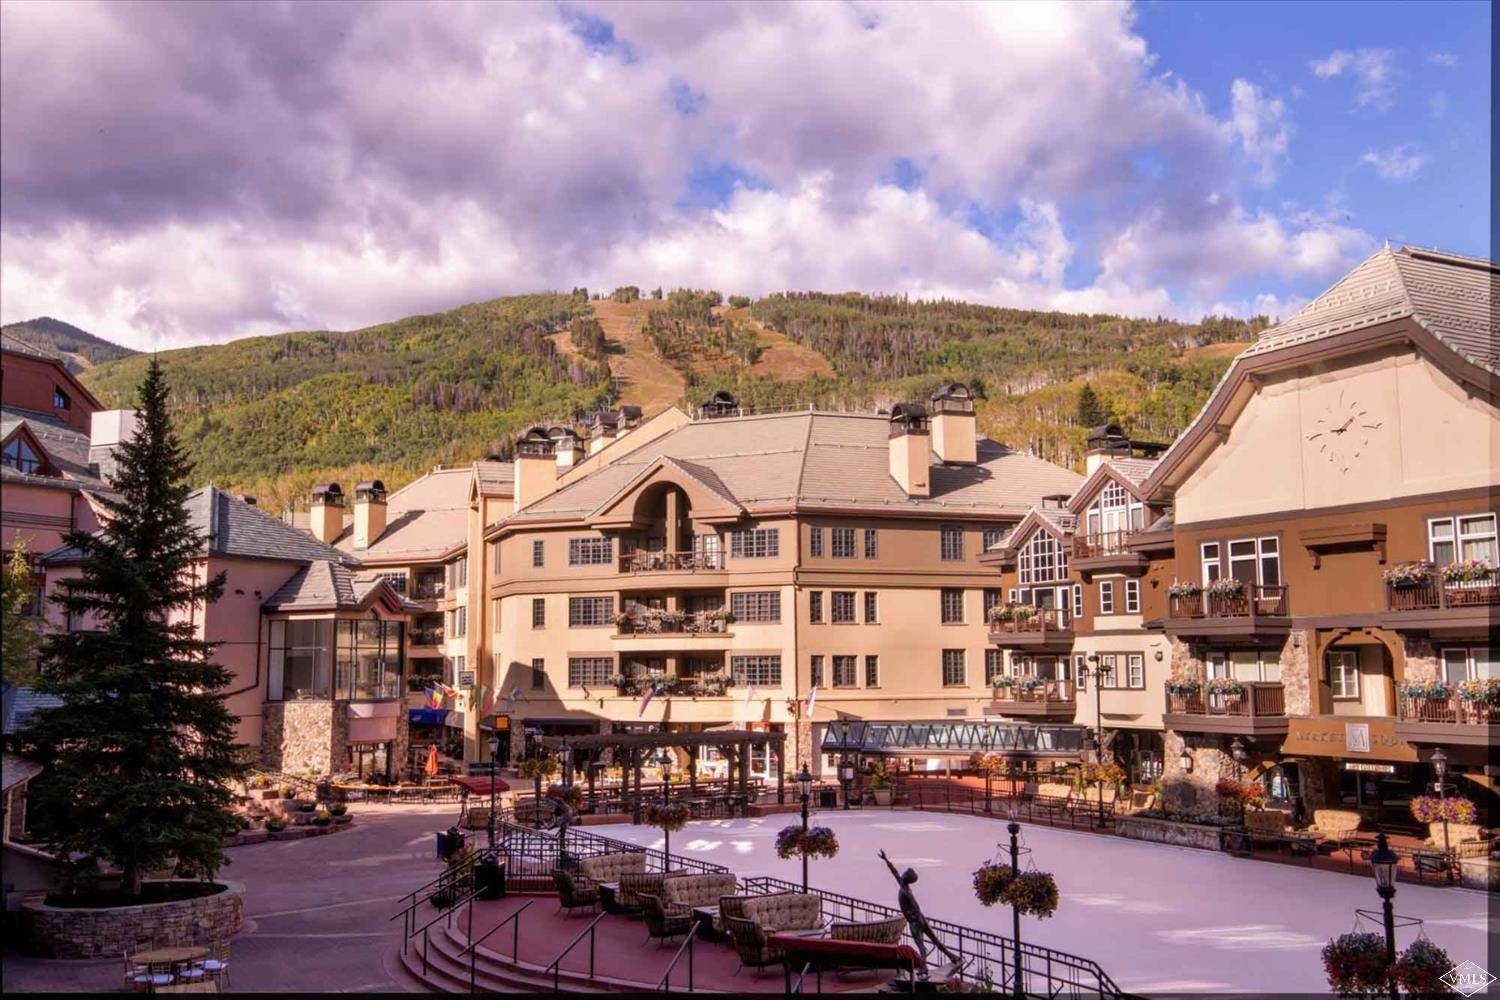 Located in the heart of Beaver Creek Village with a balcony overlooking Beaver Creek.